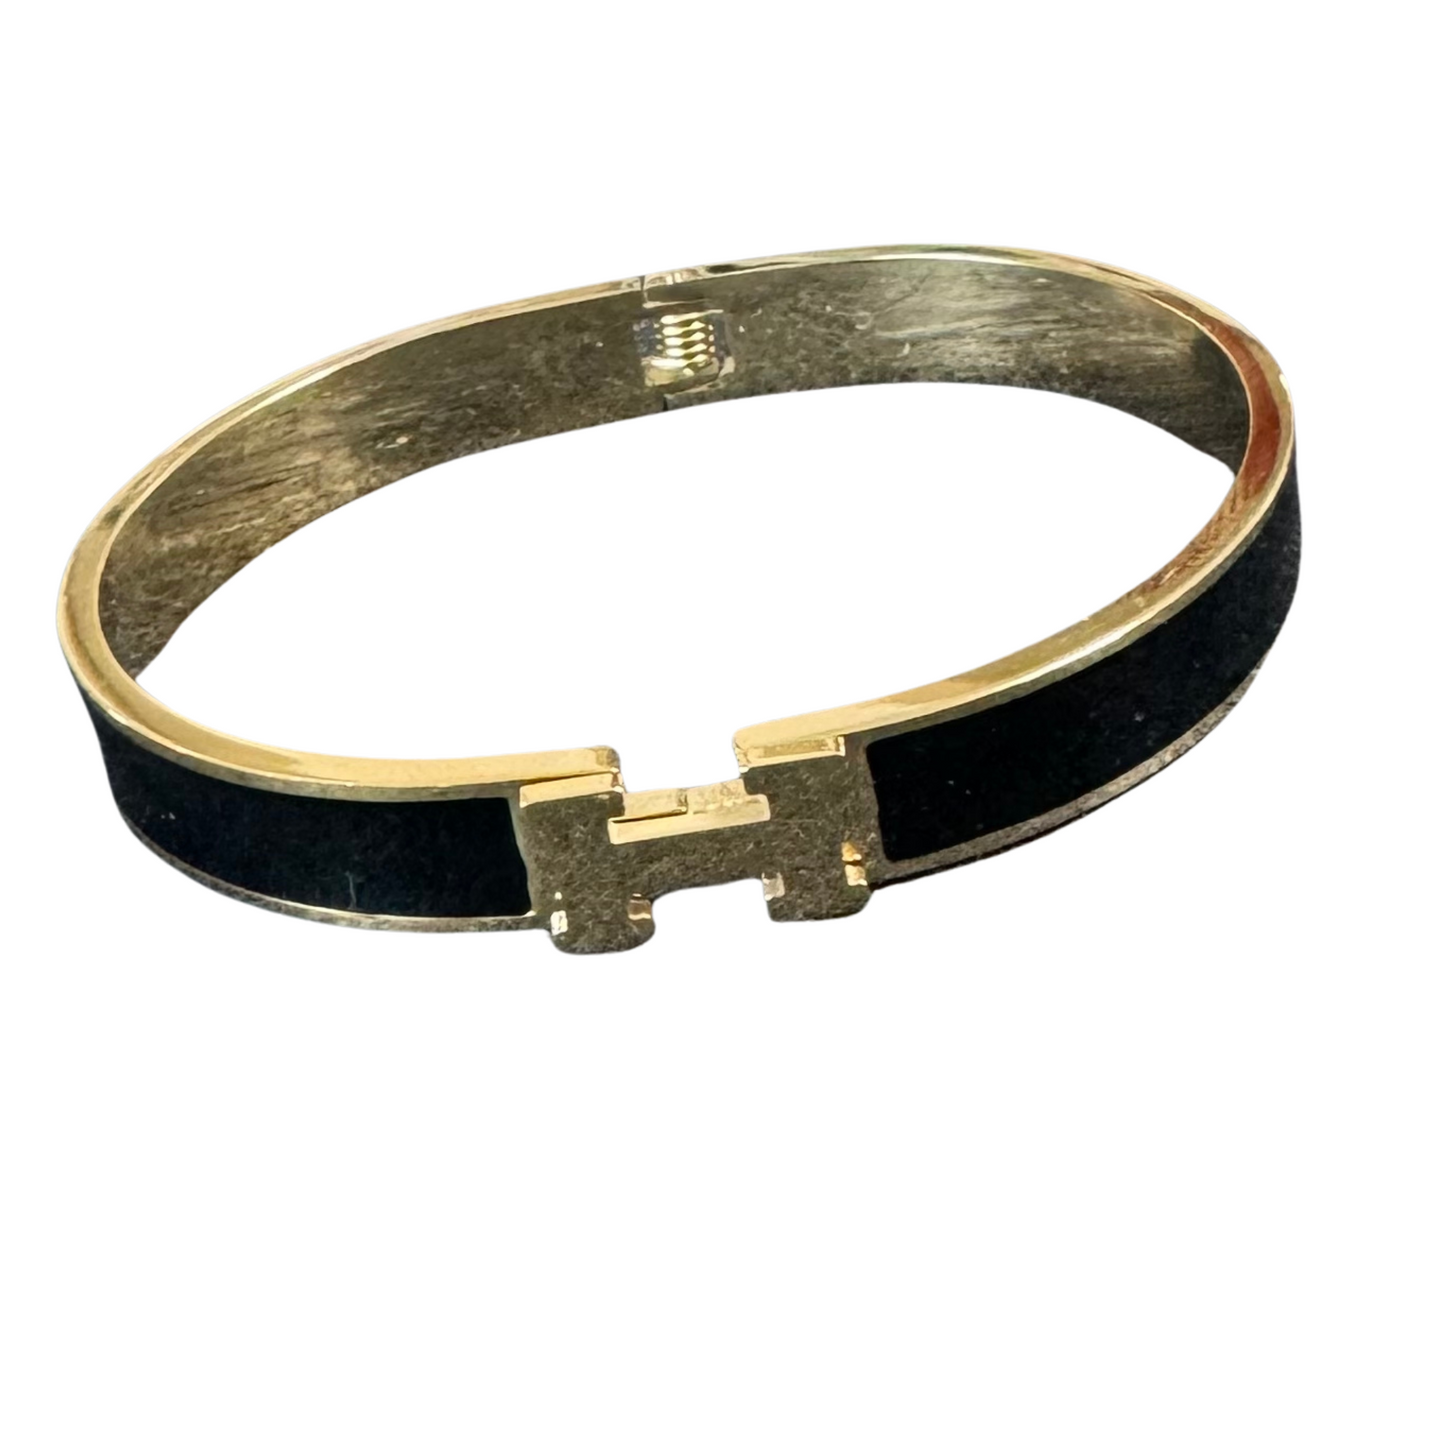 This Hermes Dupe Cuff Bangle adds a touch of elegance to any outfit with its beautifully crafted  gold and black  design. Made in the style of the renowned fashion brand, this cuff bangle is a versatile accessory that can be worn for both casual and formal occasions. The perfect addition to any jewelry collection.